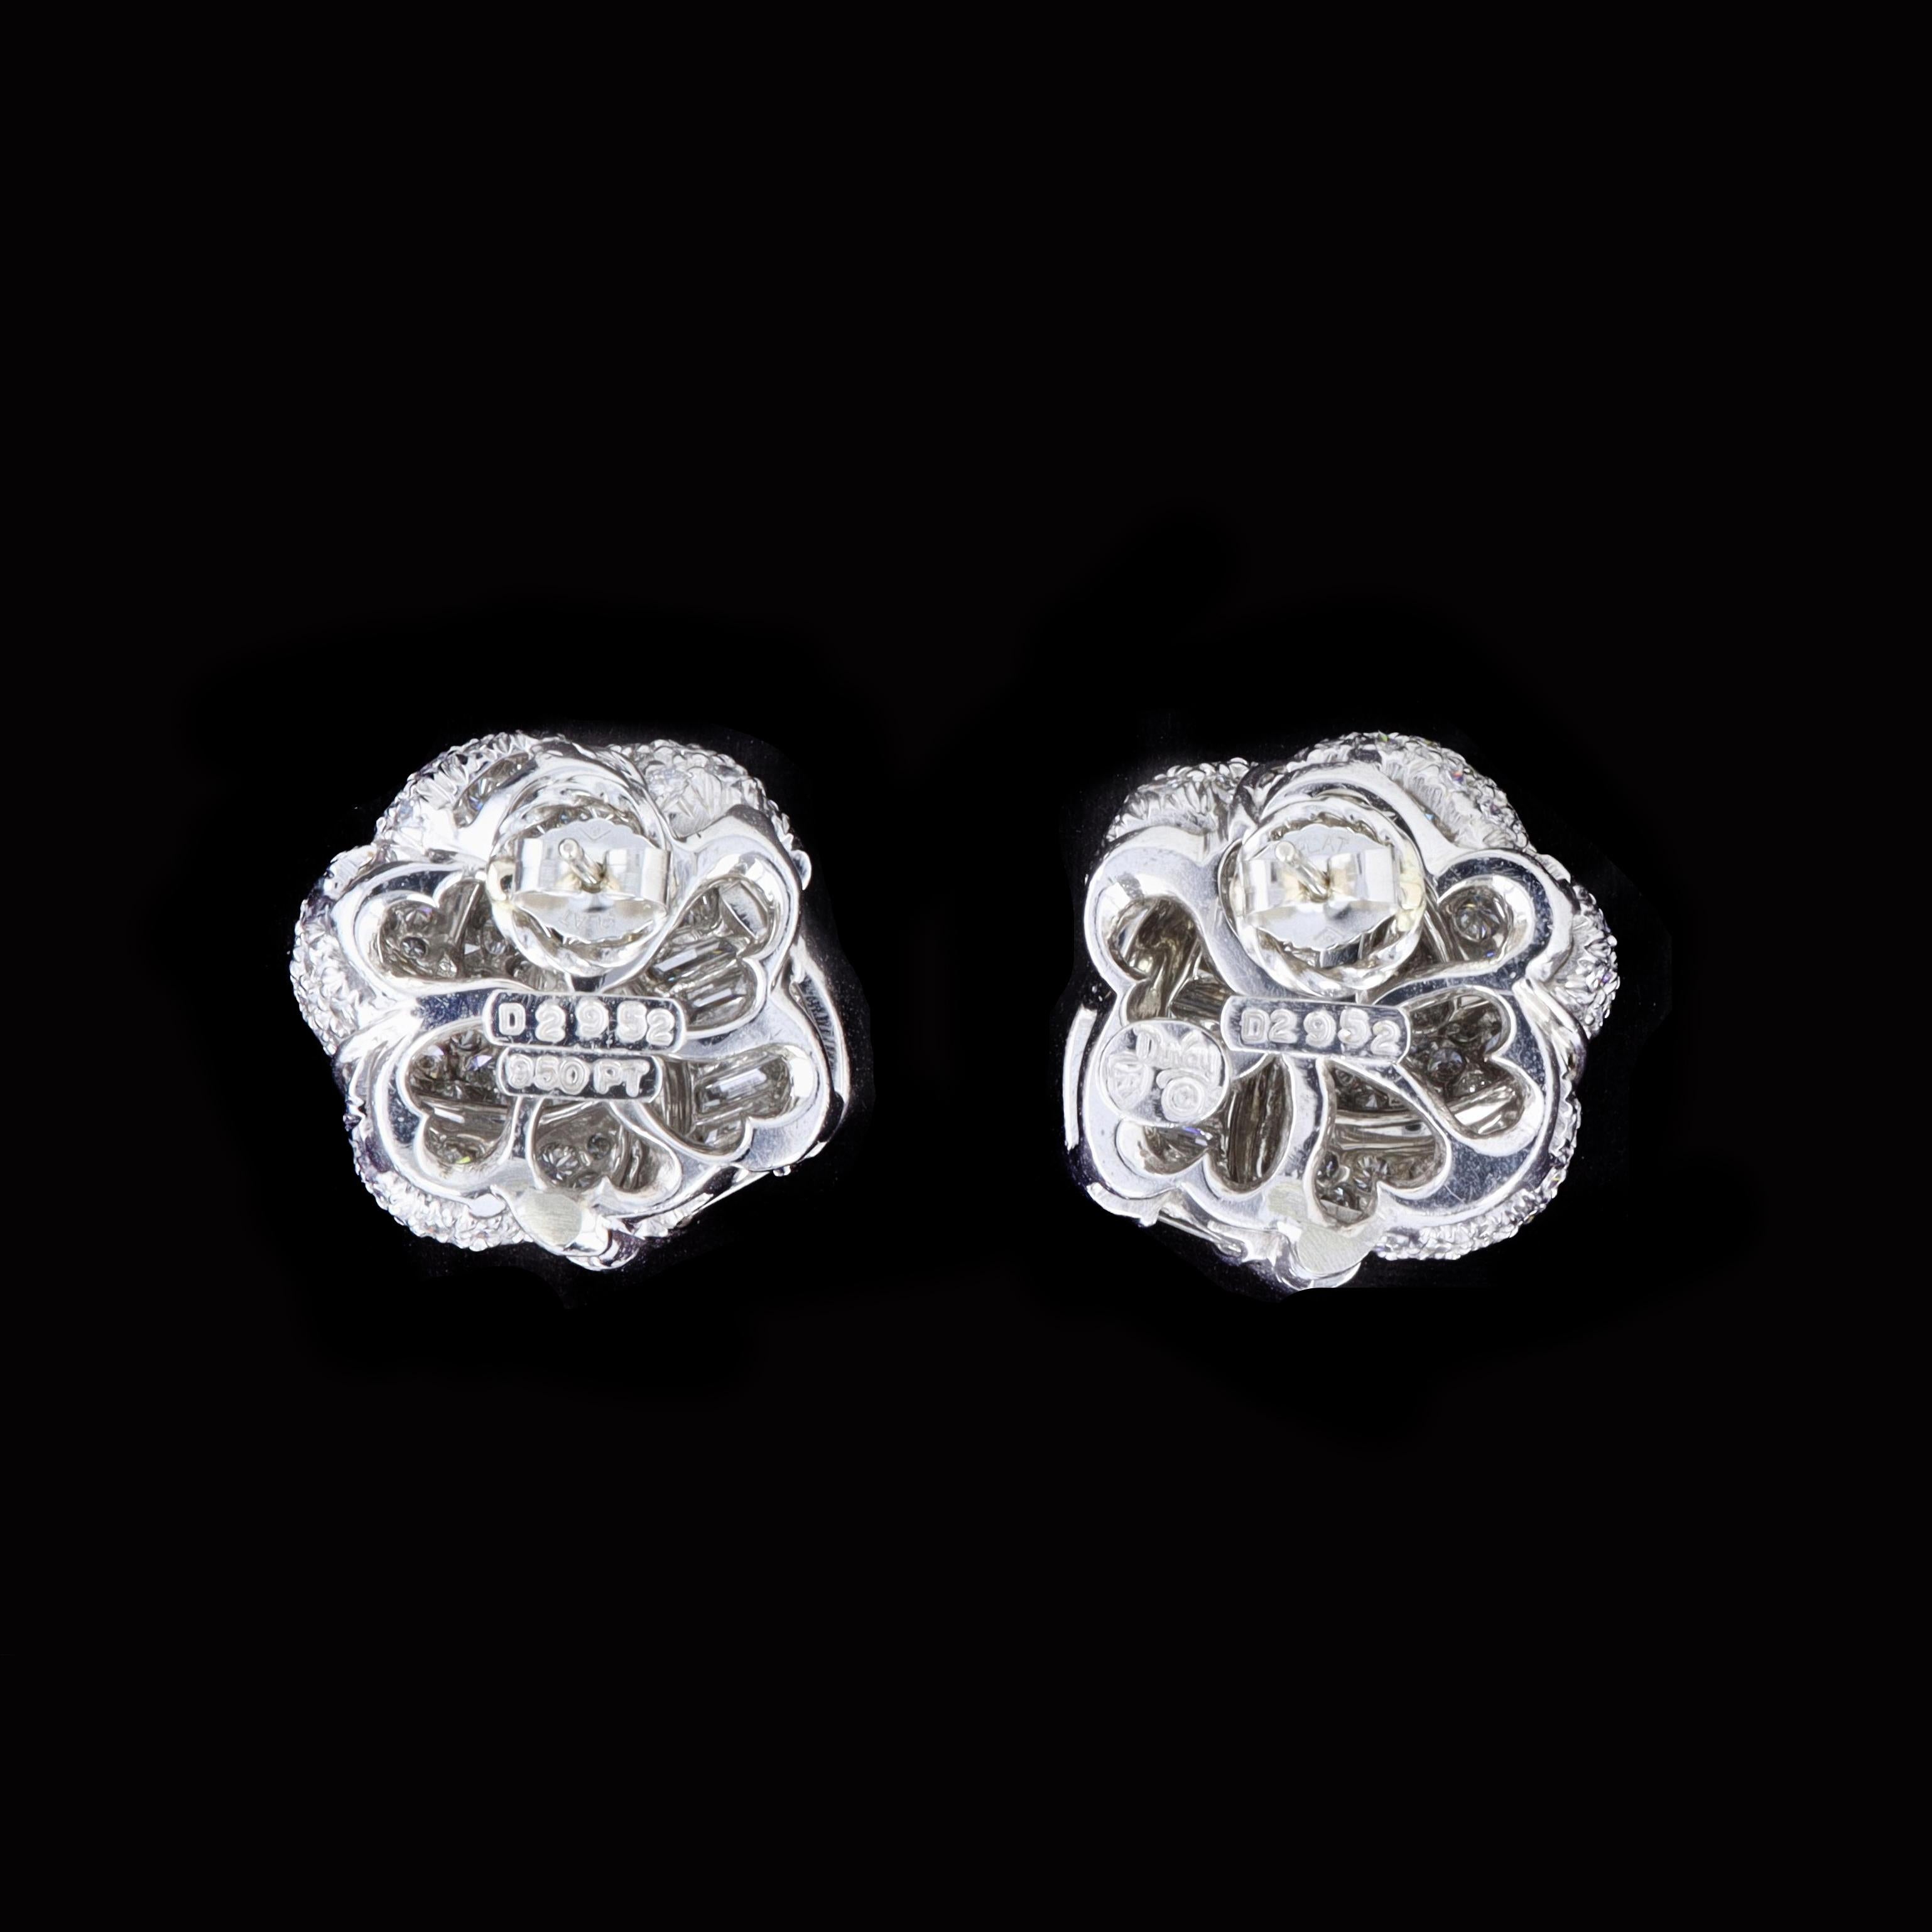 Created by acclaimed jewelry designer Henry Dunay, these 2.95ct diamond platinum earrings feature an intricate design and unending shimmer. The earrings feature baguette and round cut diamonds that weigh approximately 2.95ct. The color of these